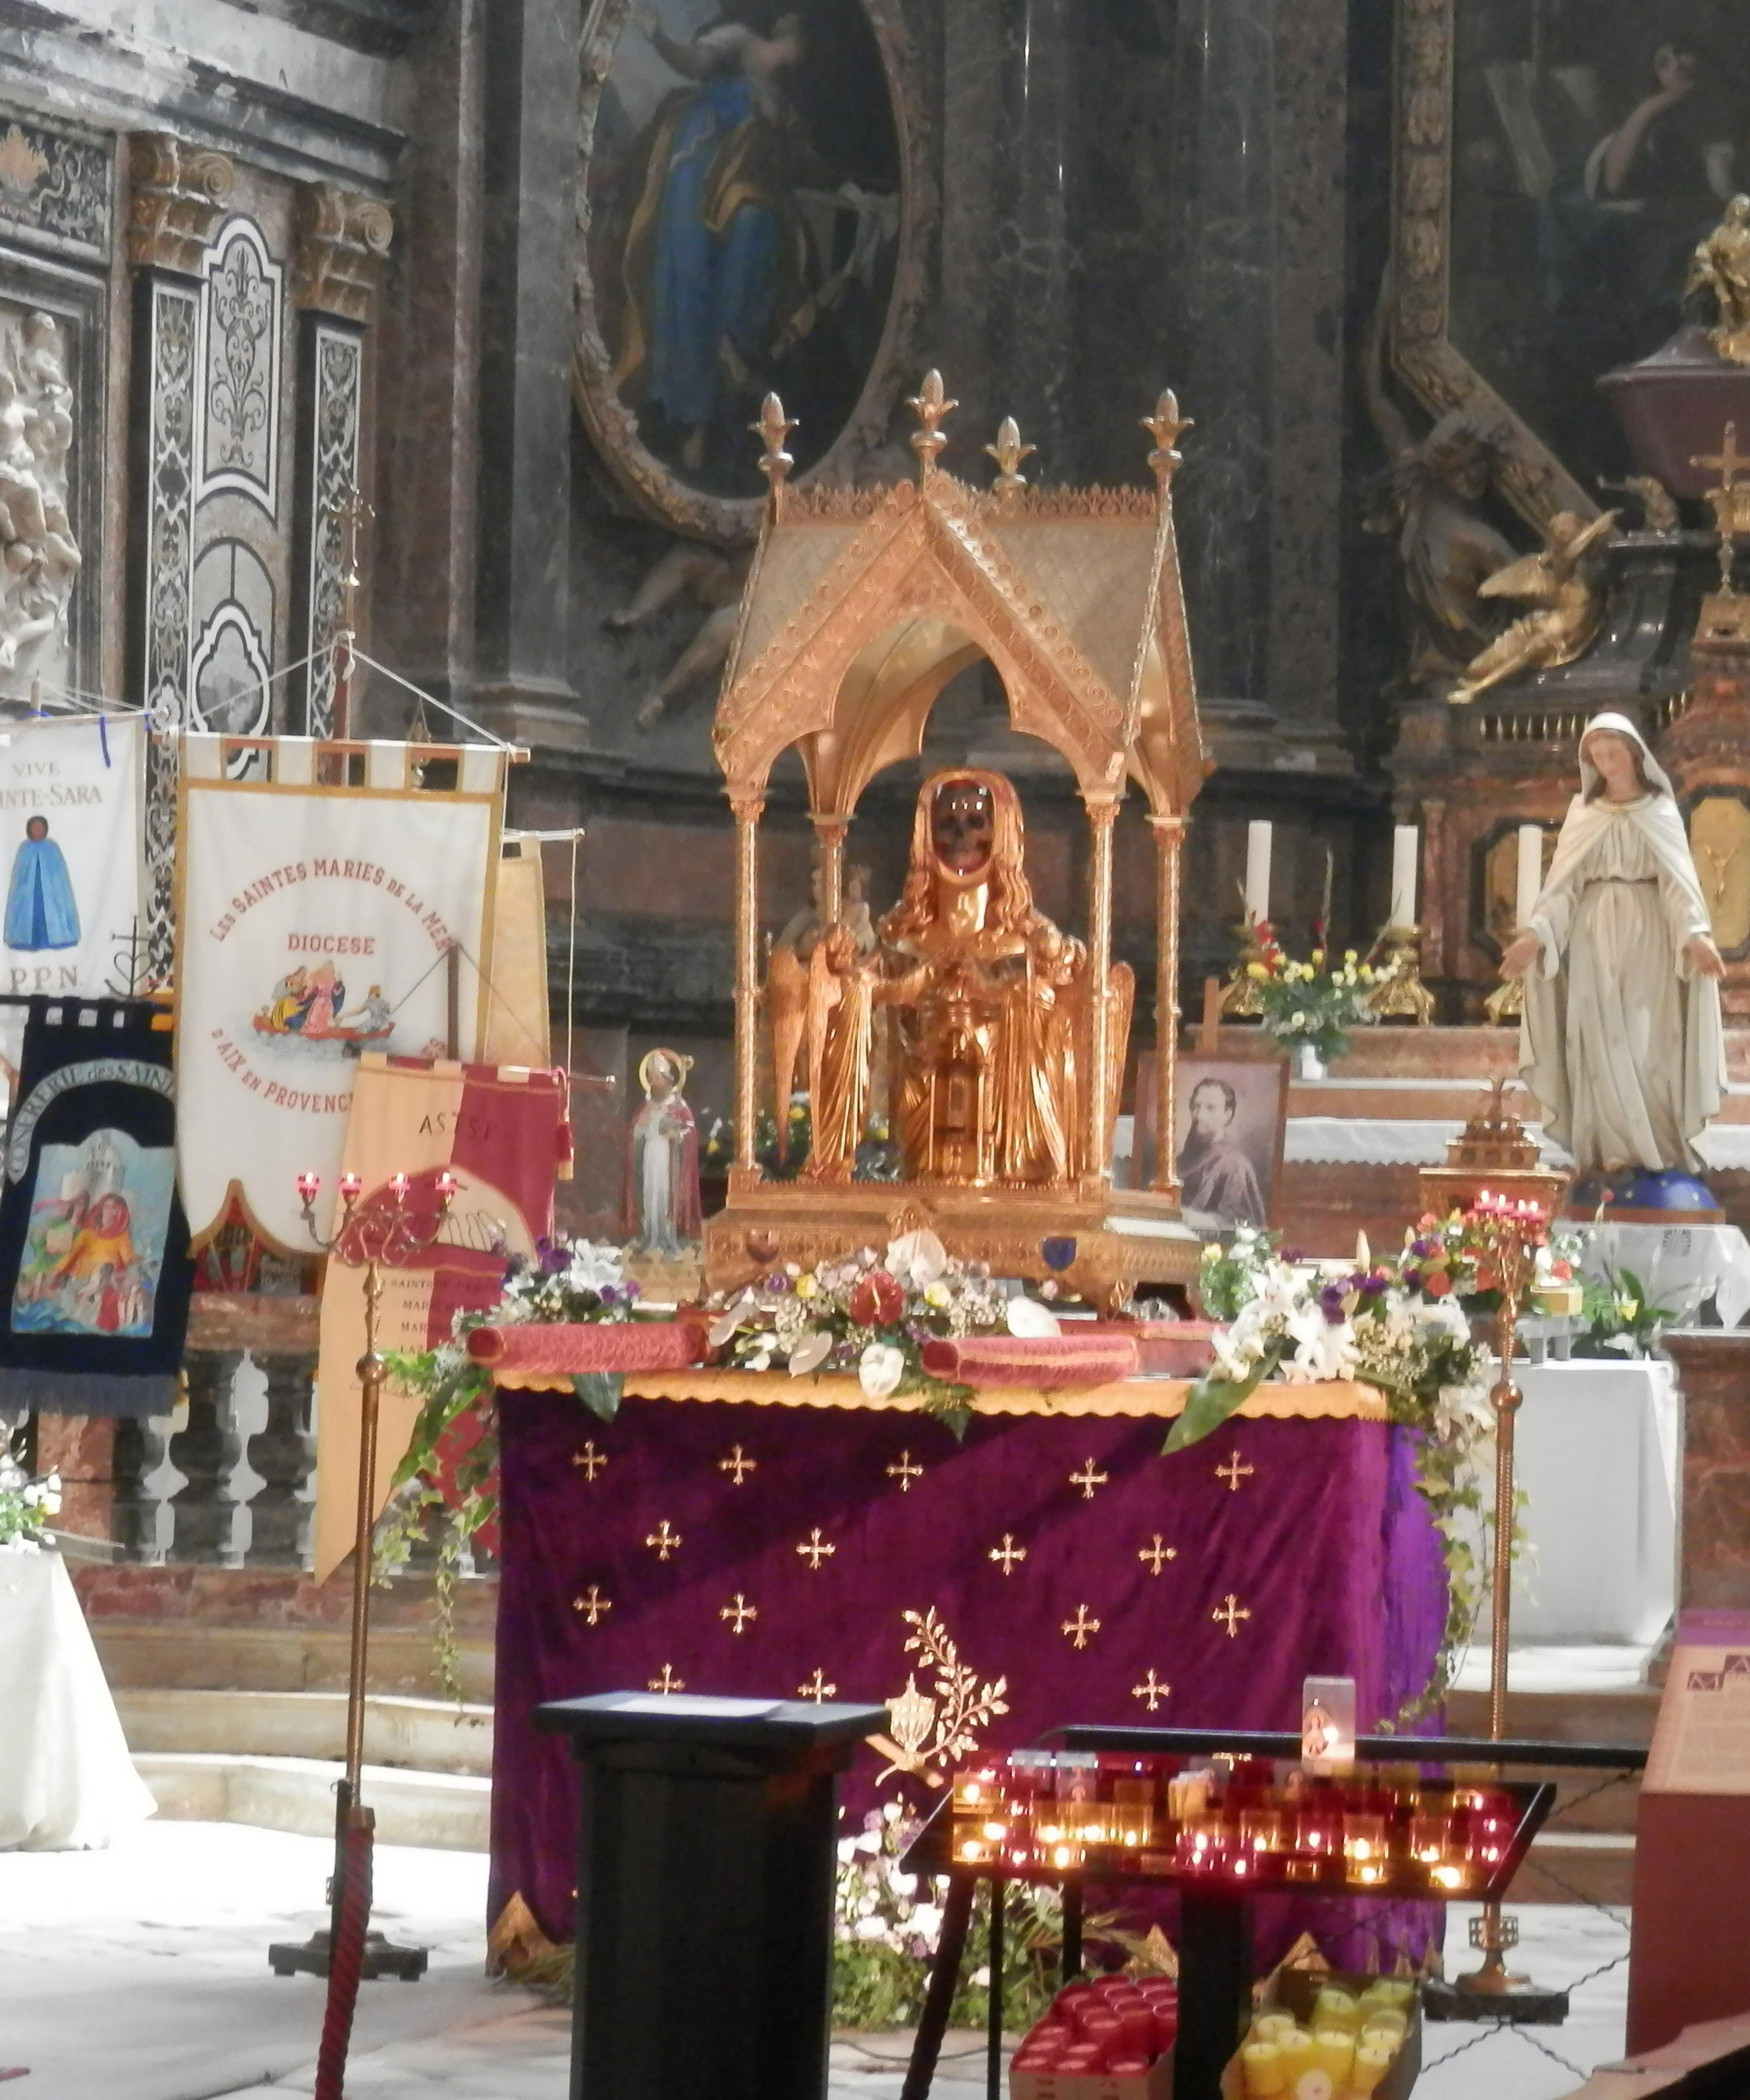 Feast Day Festivities in the Basilique